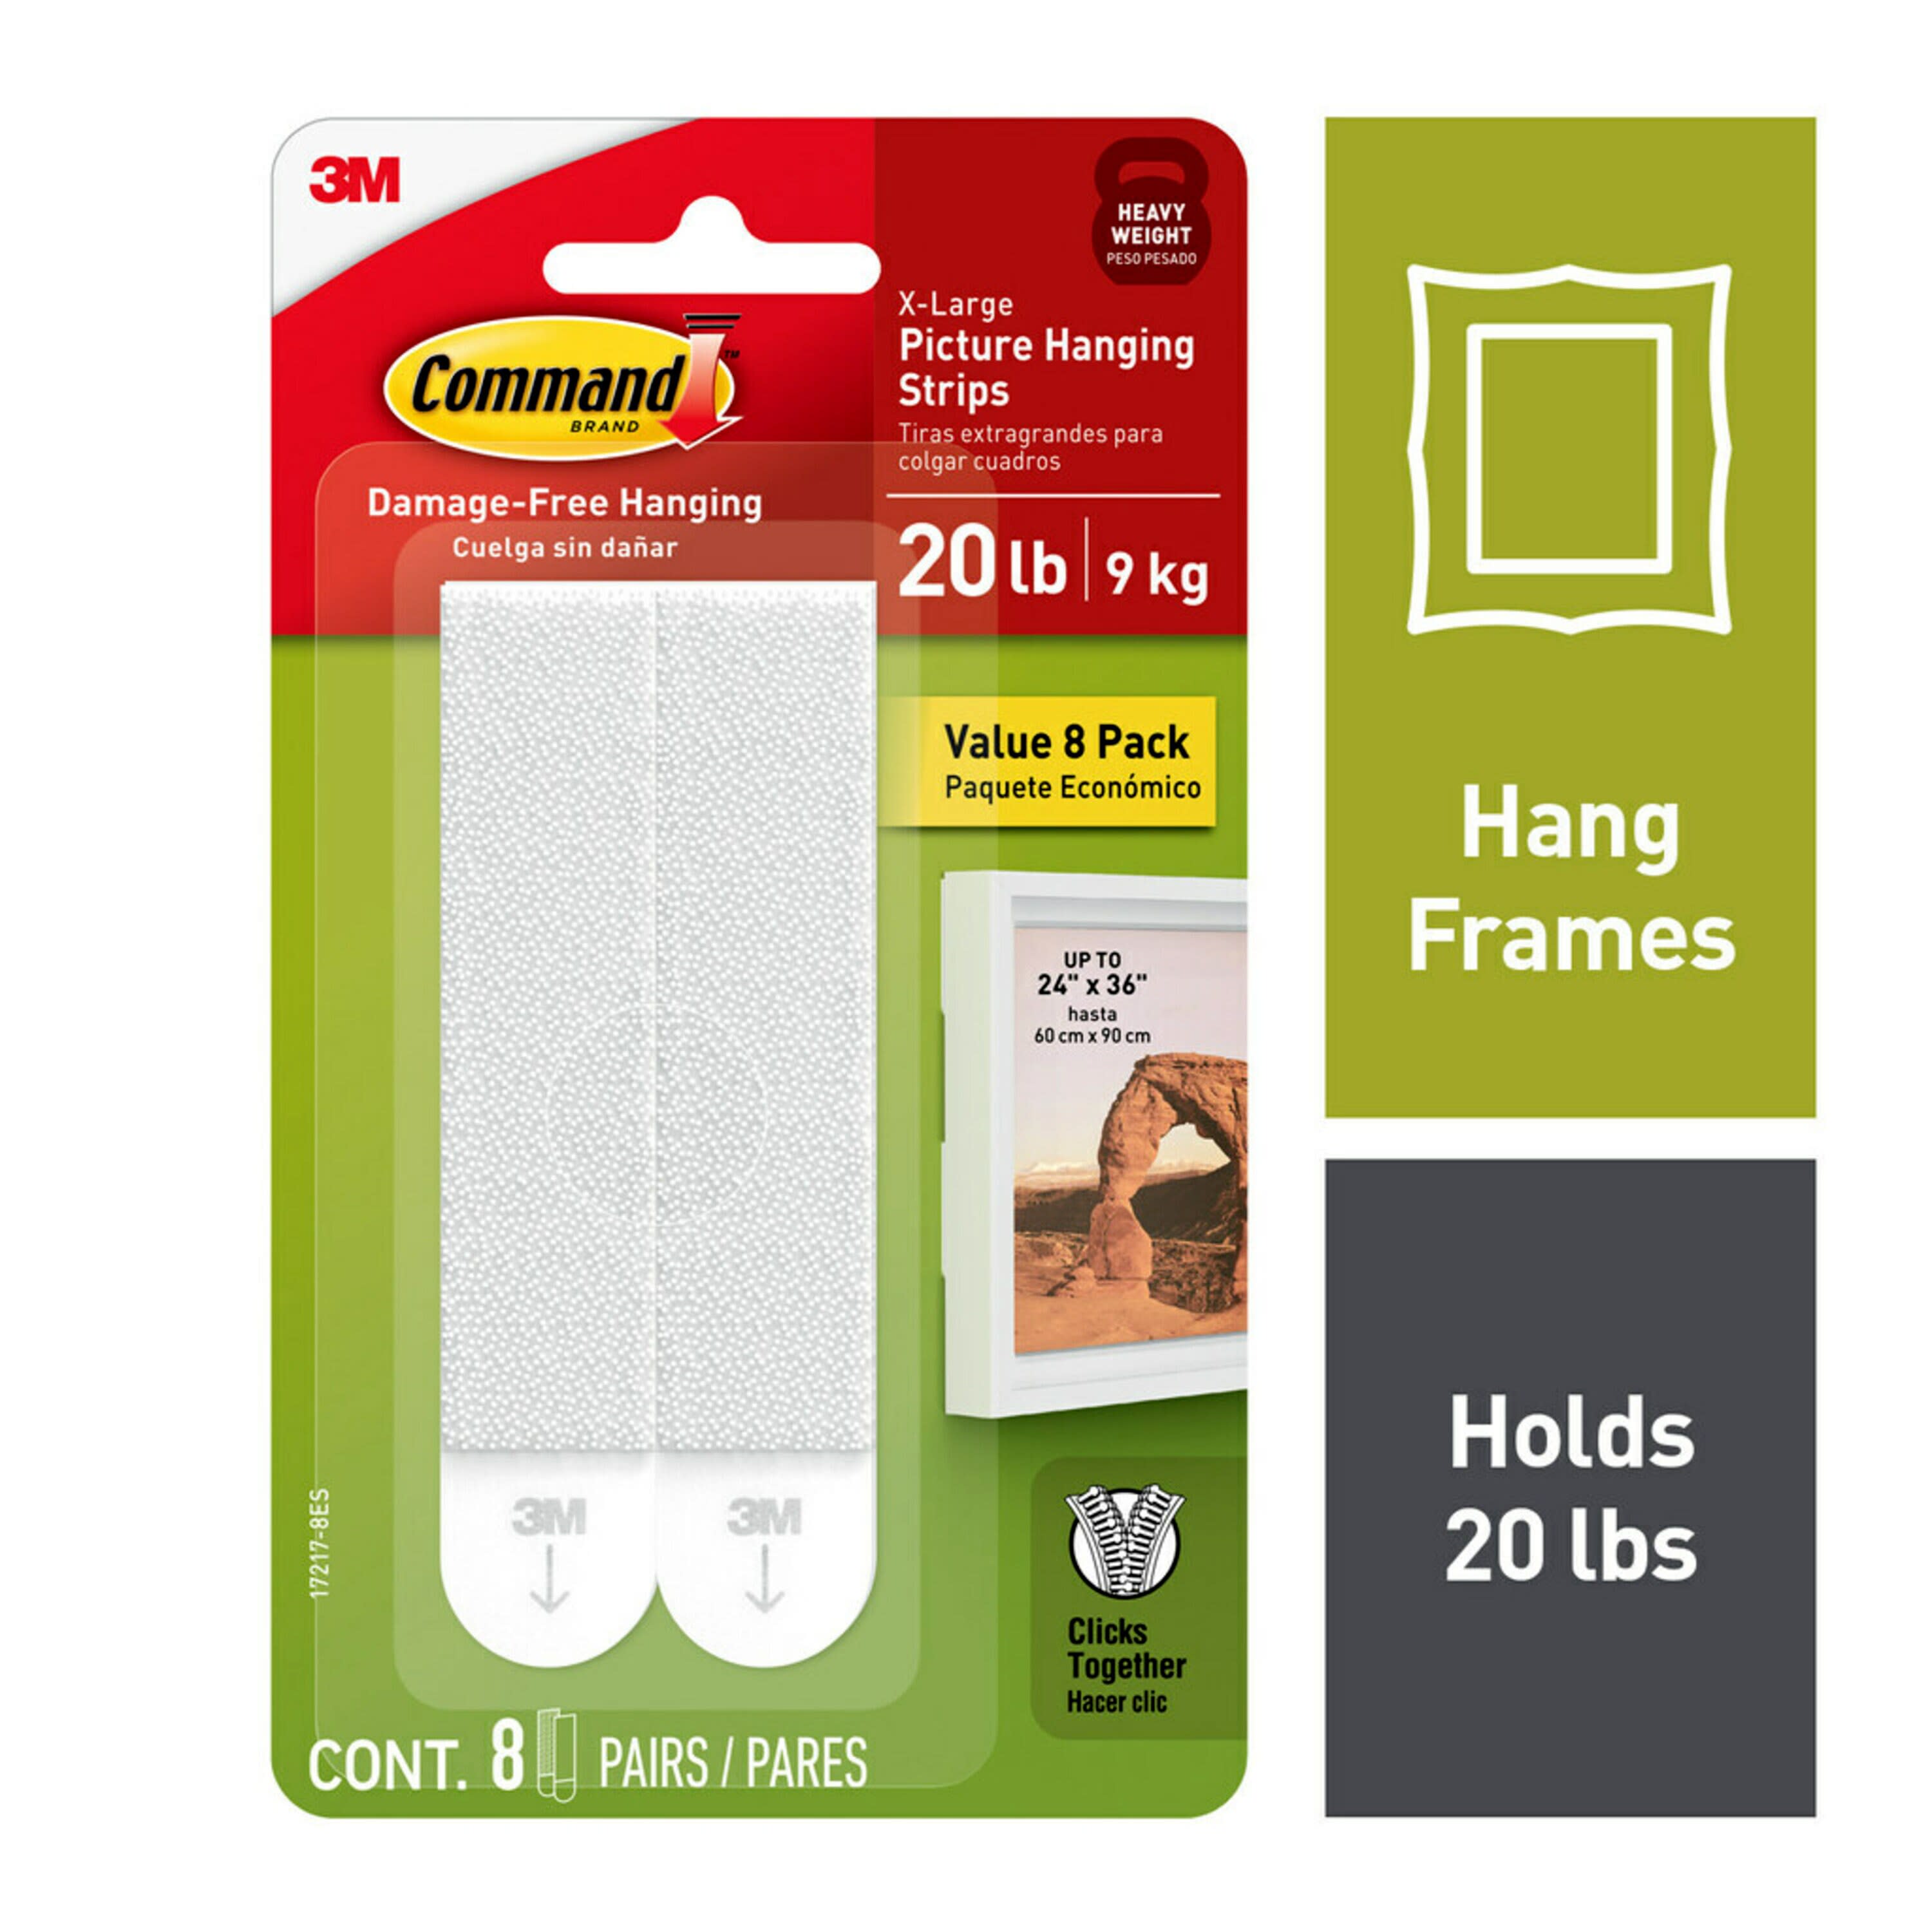 Double-sided adhesive strip Picture Hangers at